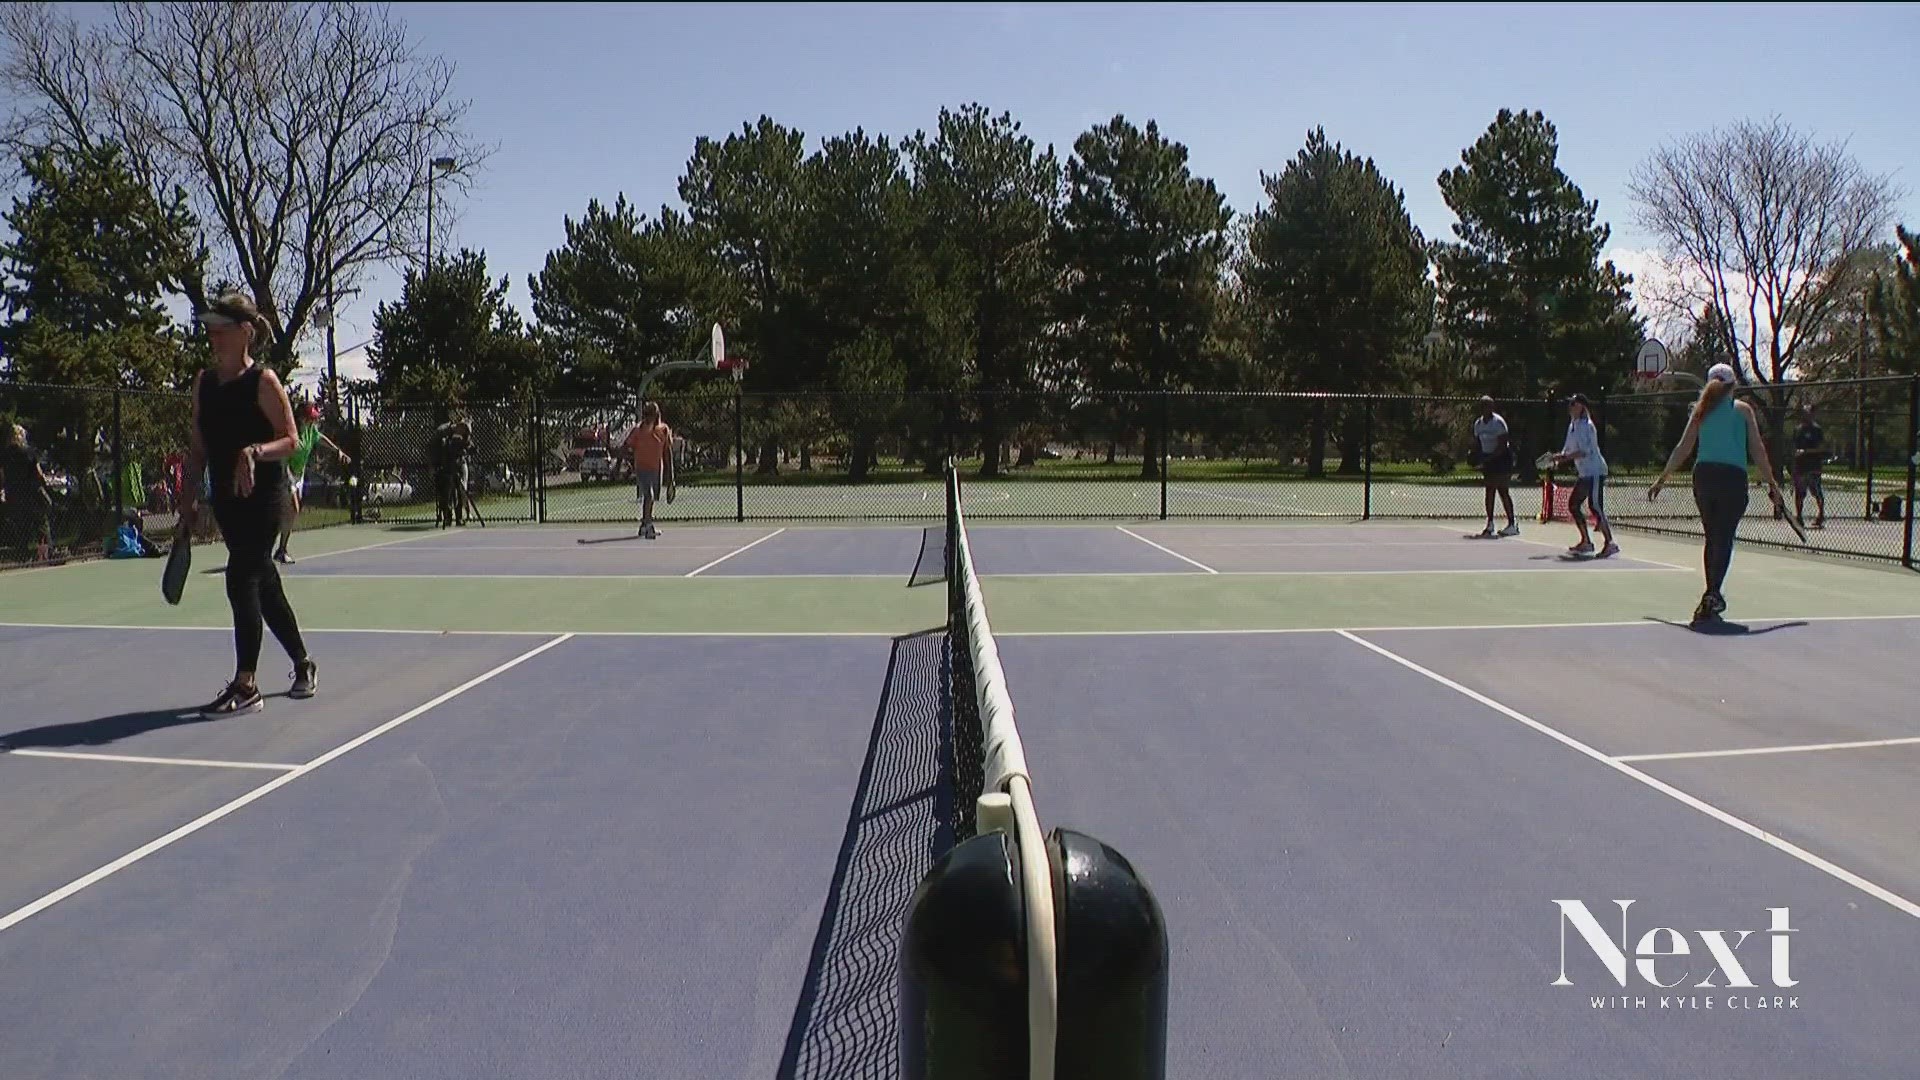 Attorney Hollynd Hoskins is appealing to a department advisory board, alleging "arbitrary and capricious" decisions about pickleball courts.